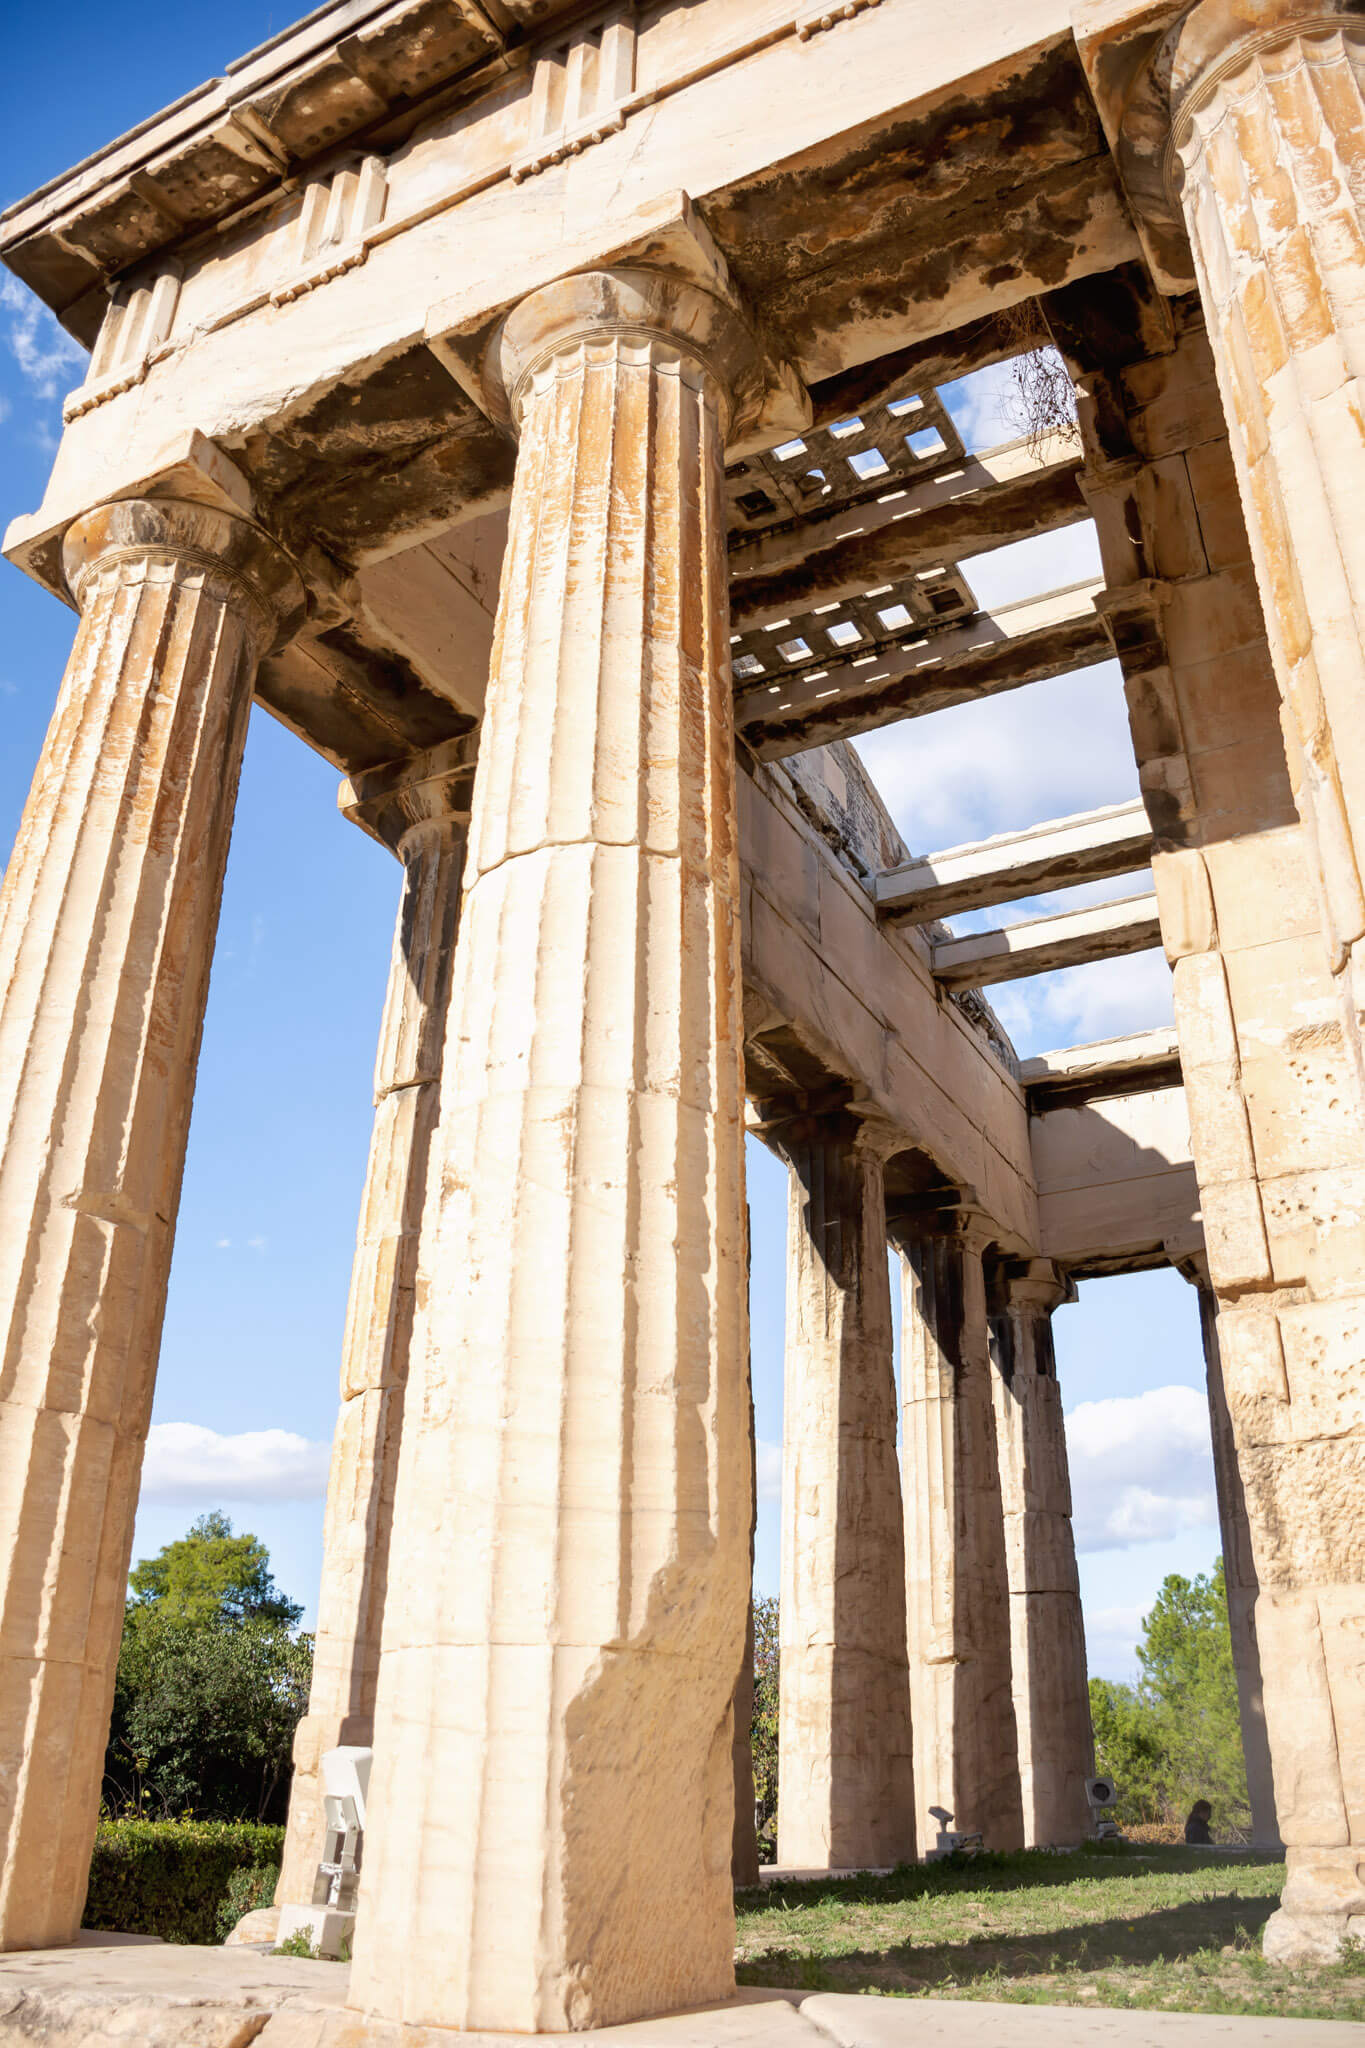 Temple at the Agora of Ancient Athens